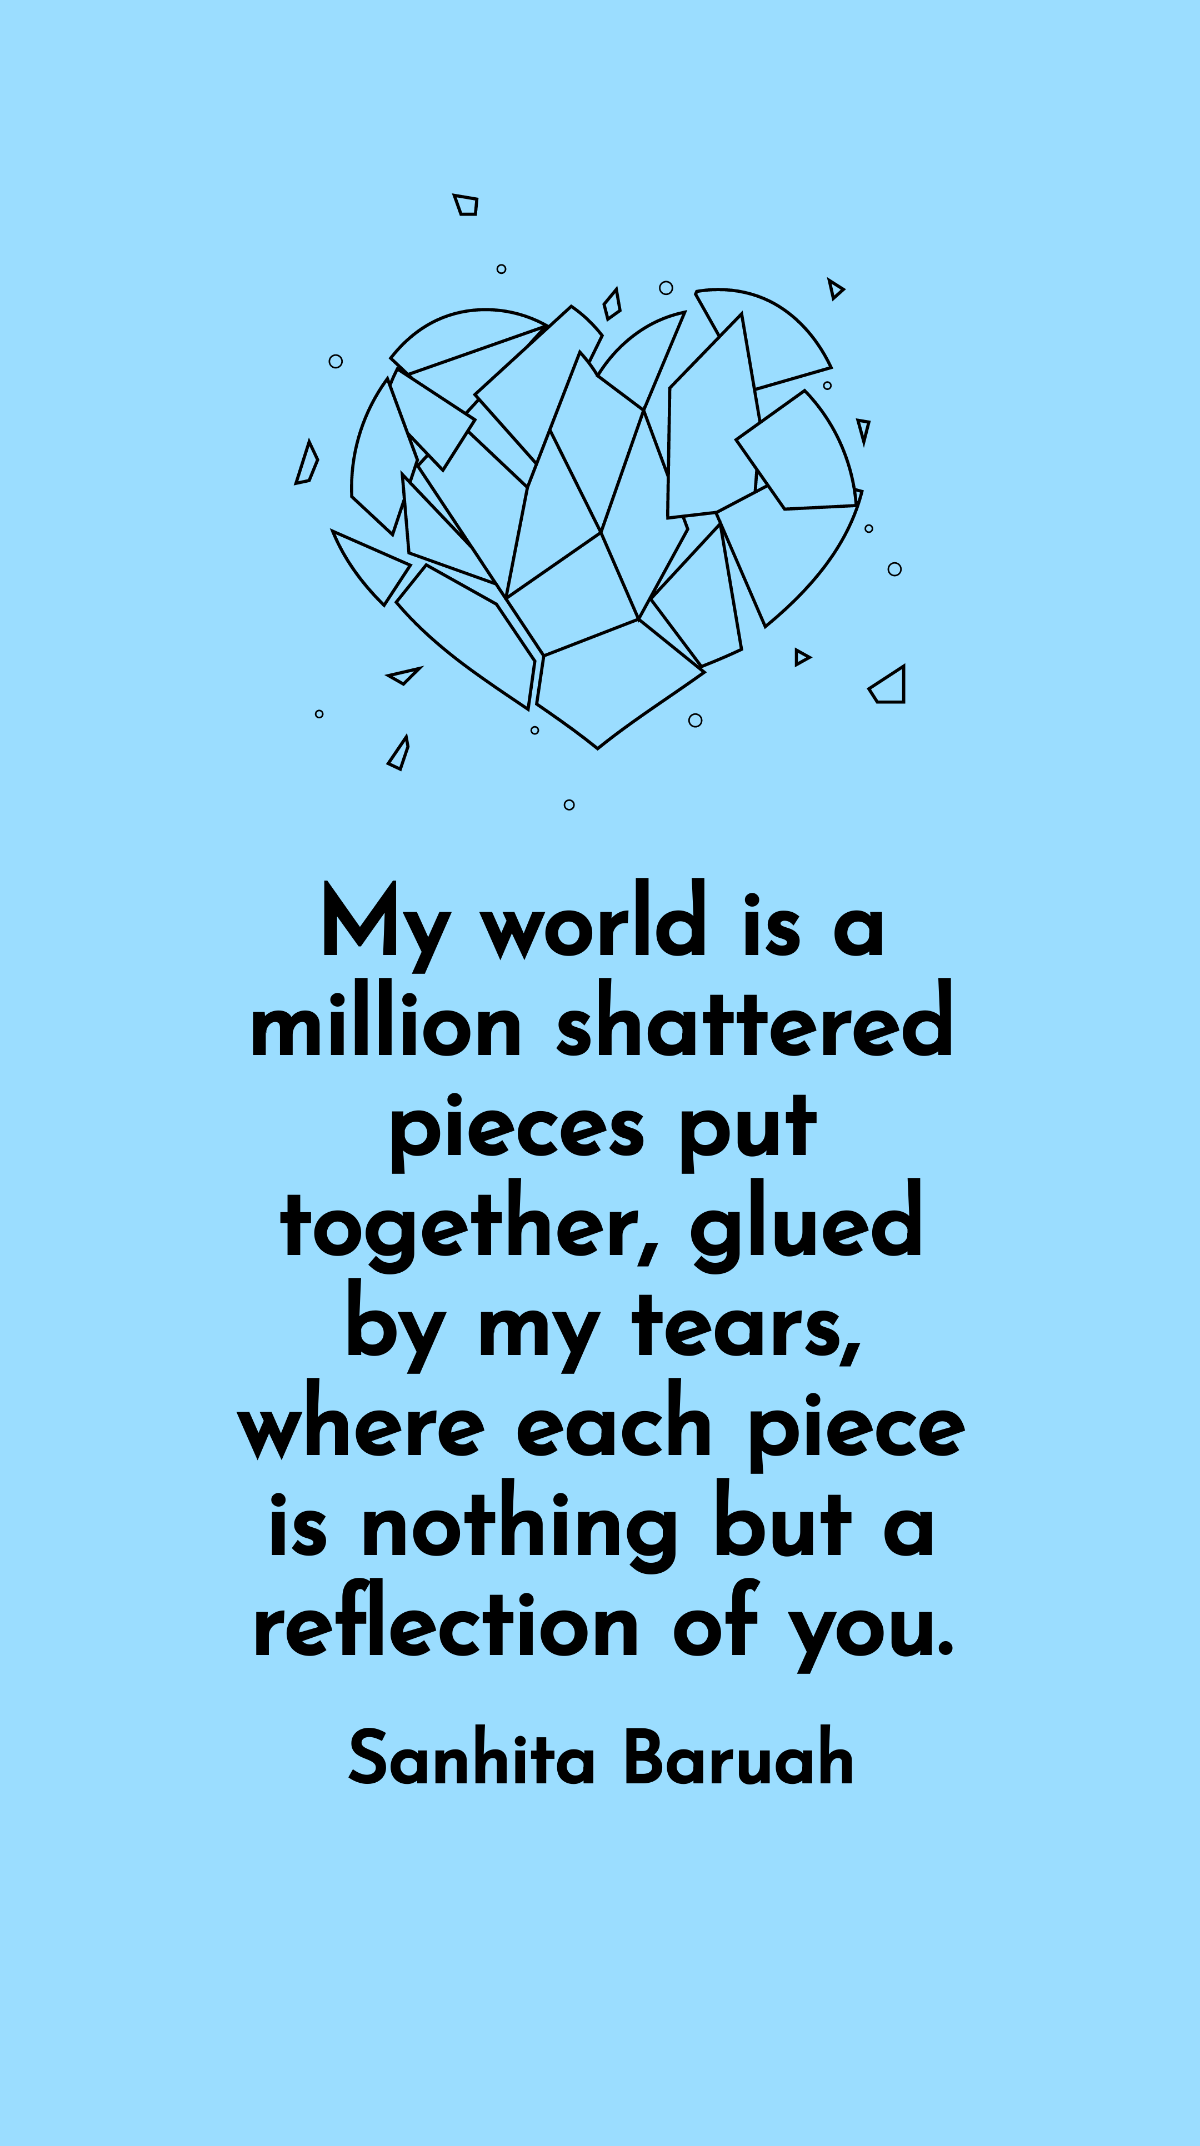 Sanhita Baruah - My world is a million shattered pieces put together, glued by my tears, where each piece is nothing but a reflection of you. Template